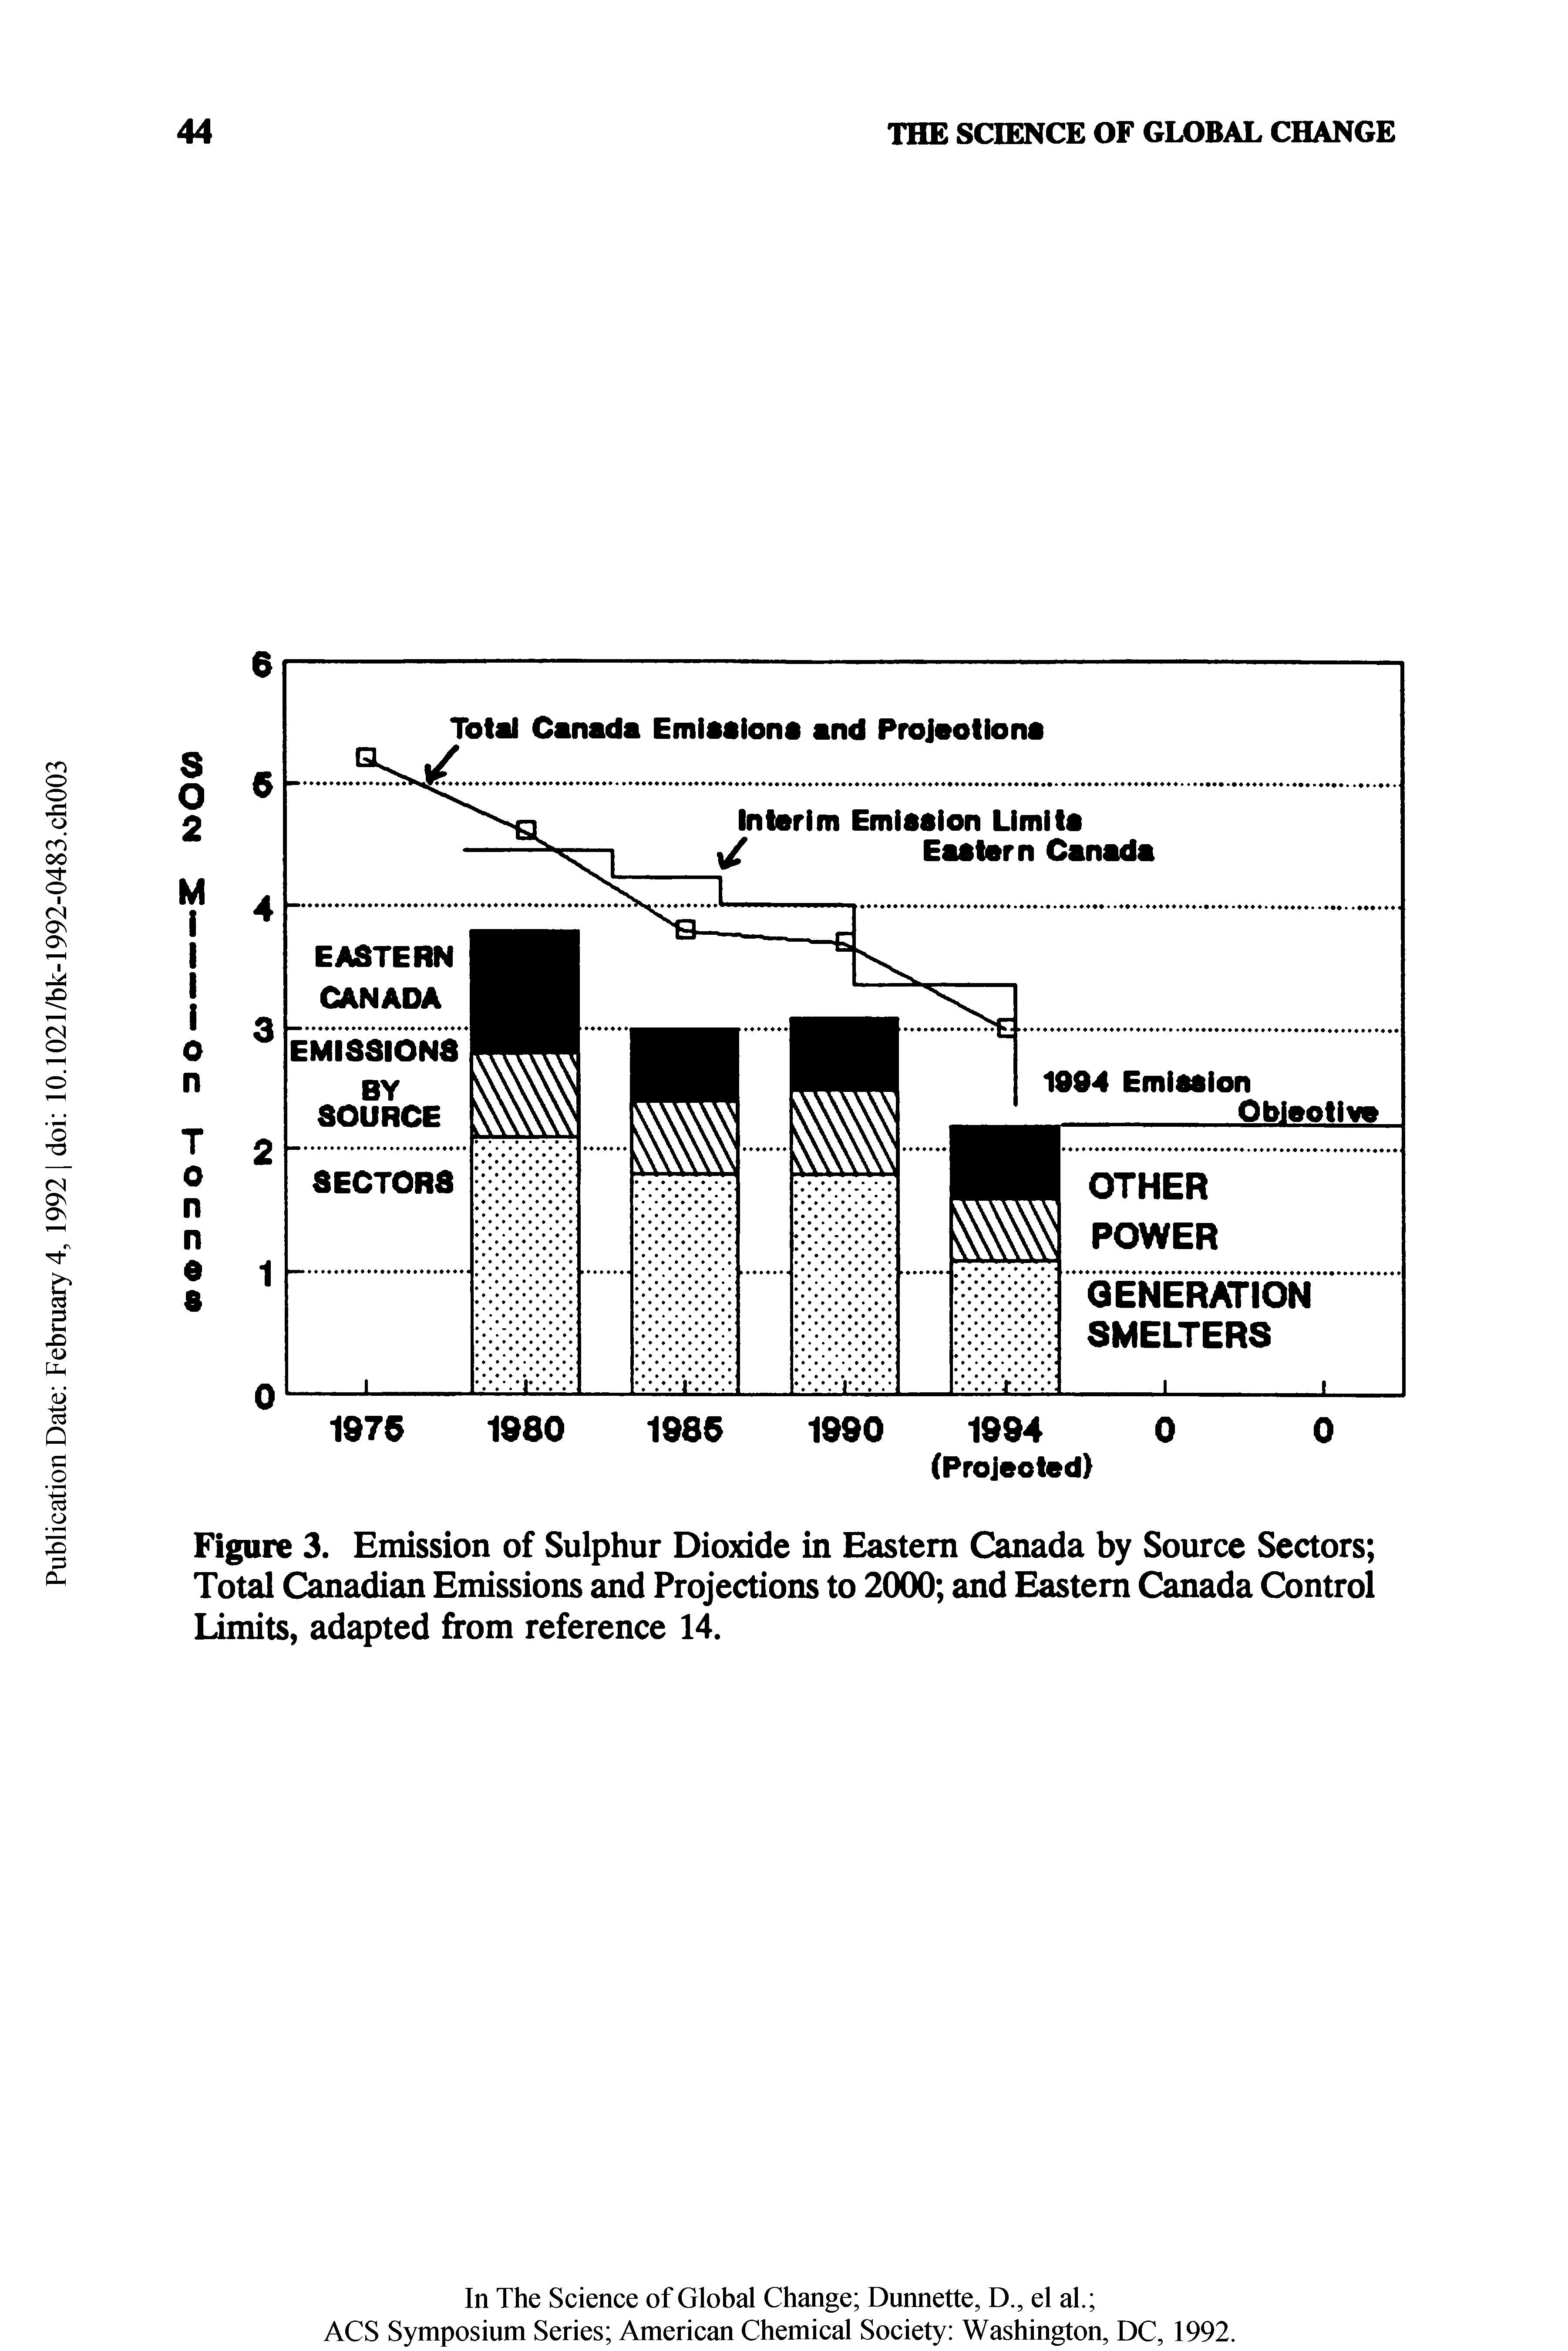 Figure 3. Emission of Sulphur Dioxide in Eastern Canada by Source Sectors Total Canadian Emissions and Projections to 2000 and Eastern Canada Control Limits, adapted from reference 14.